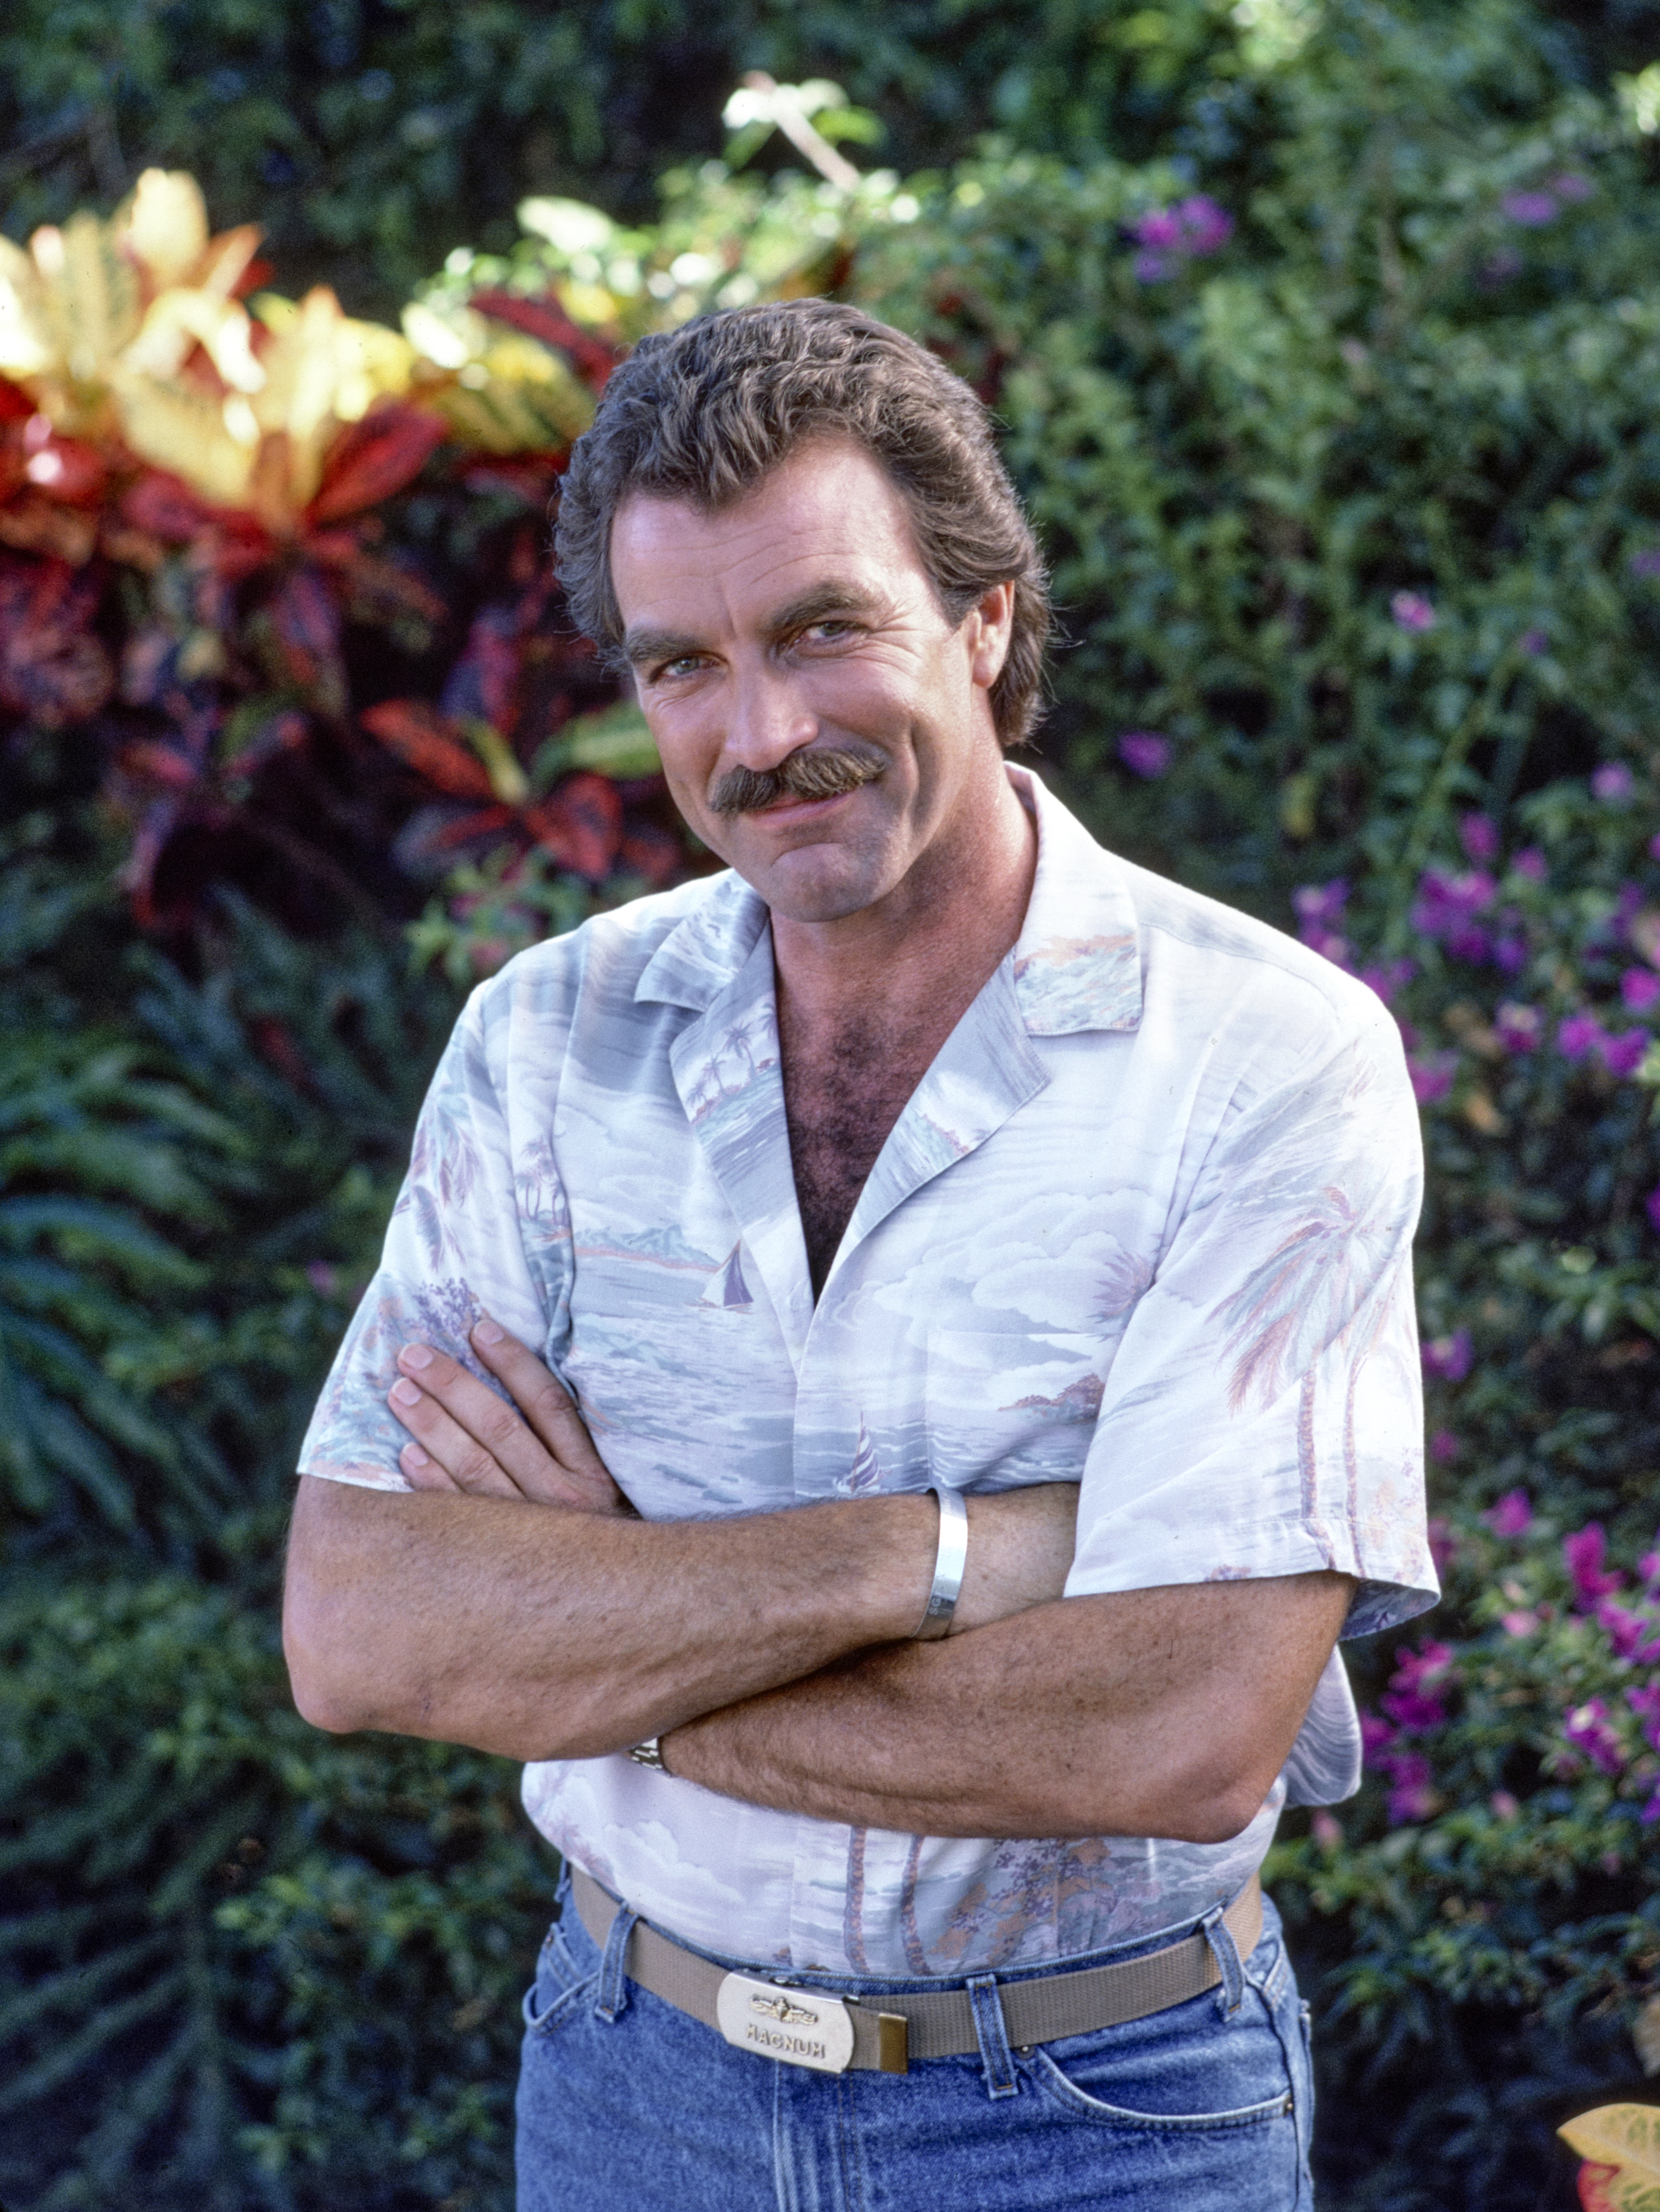 Tom Selleck on "Magnum P.I." in 1985 | Source: Getty Images